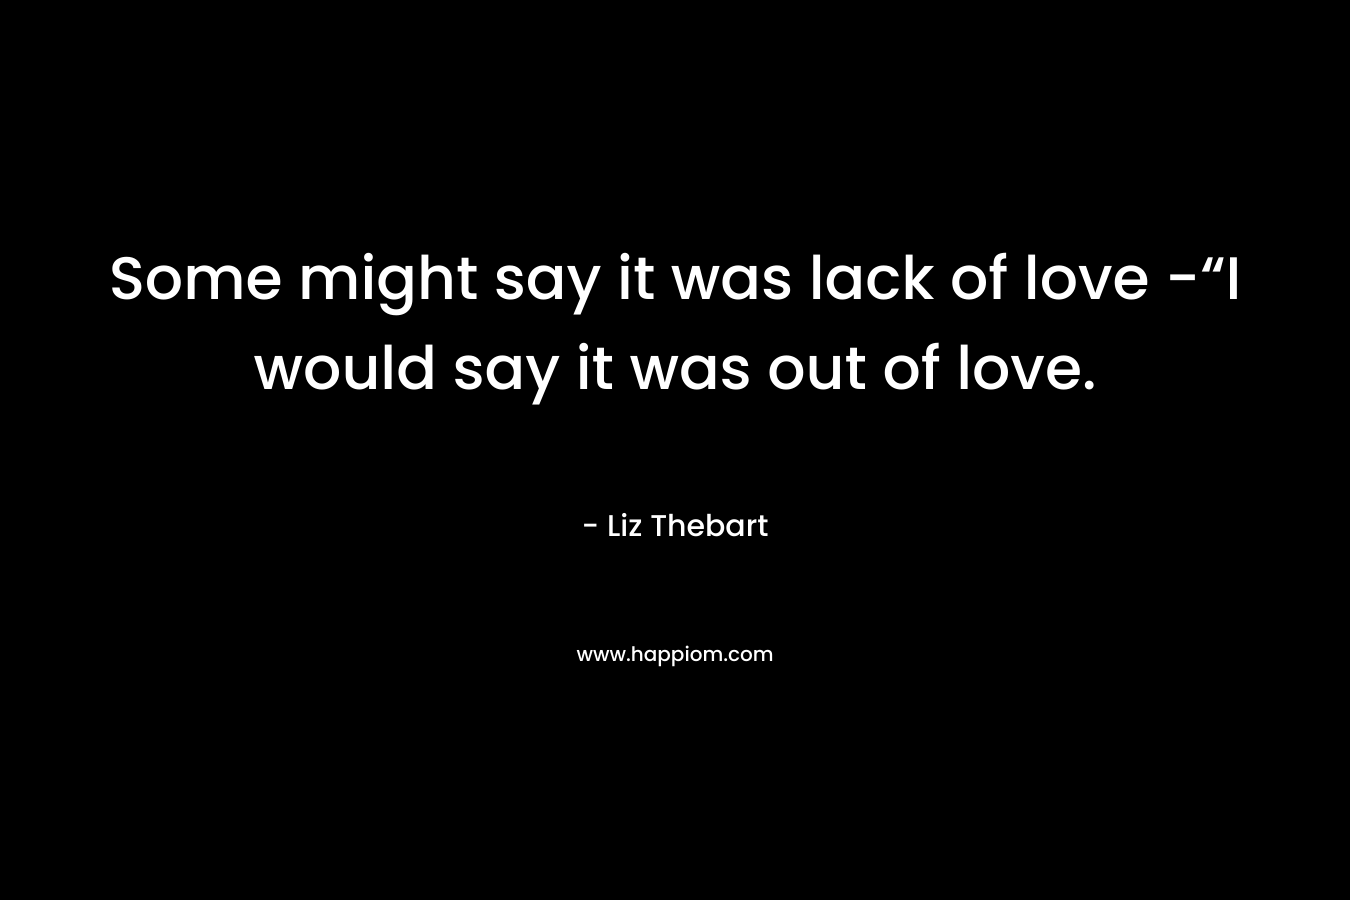 Some might say it was lack of love -“I would say it was out of love.